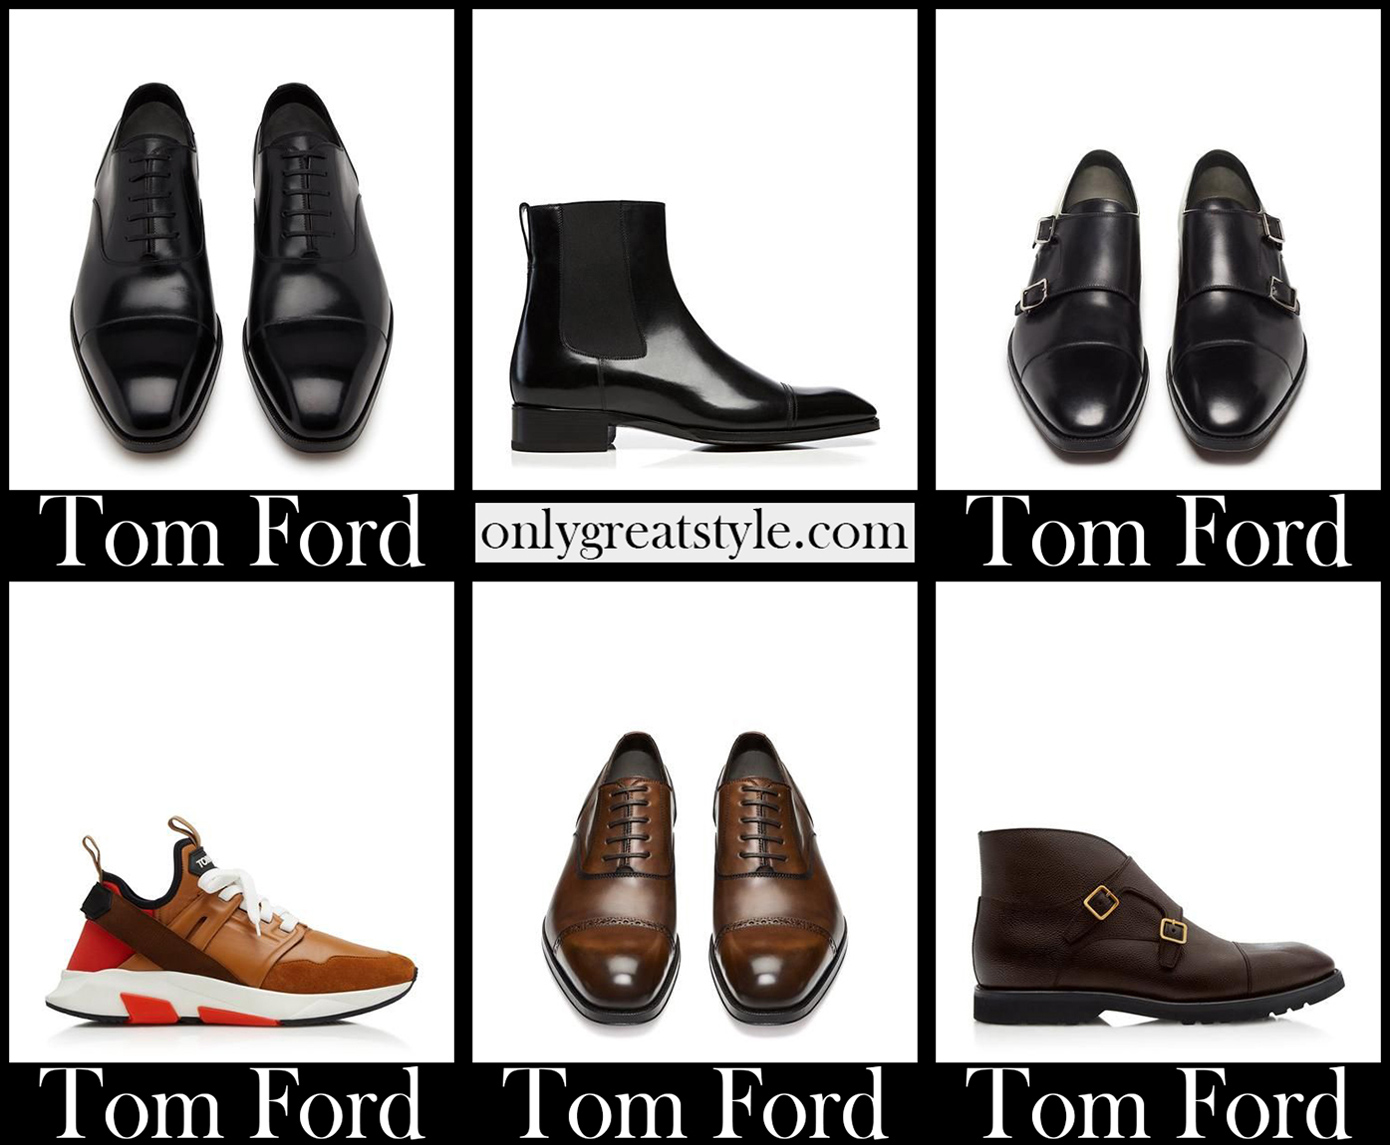 Tom Ford shoes 2021 new arrivals mens footwear